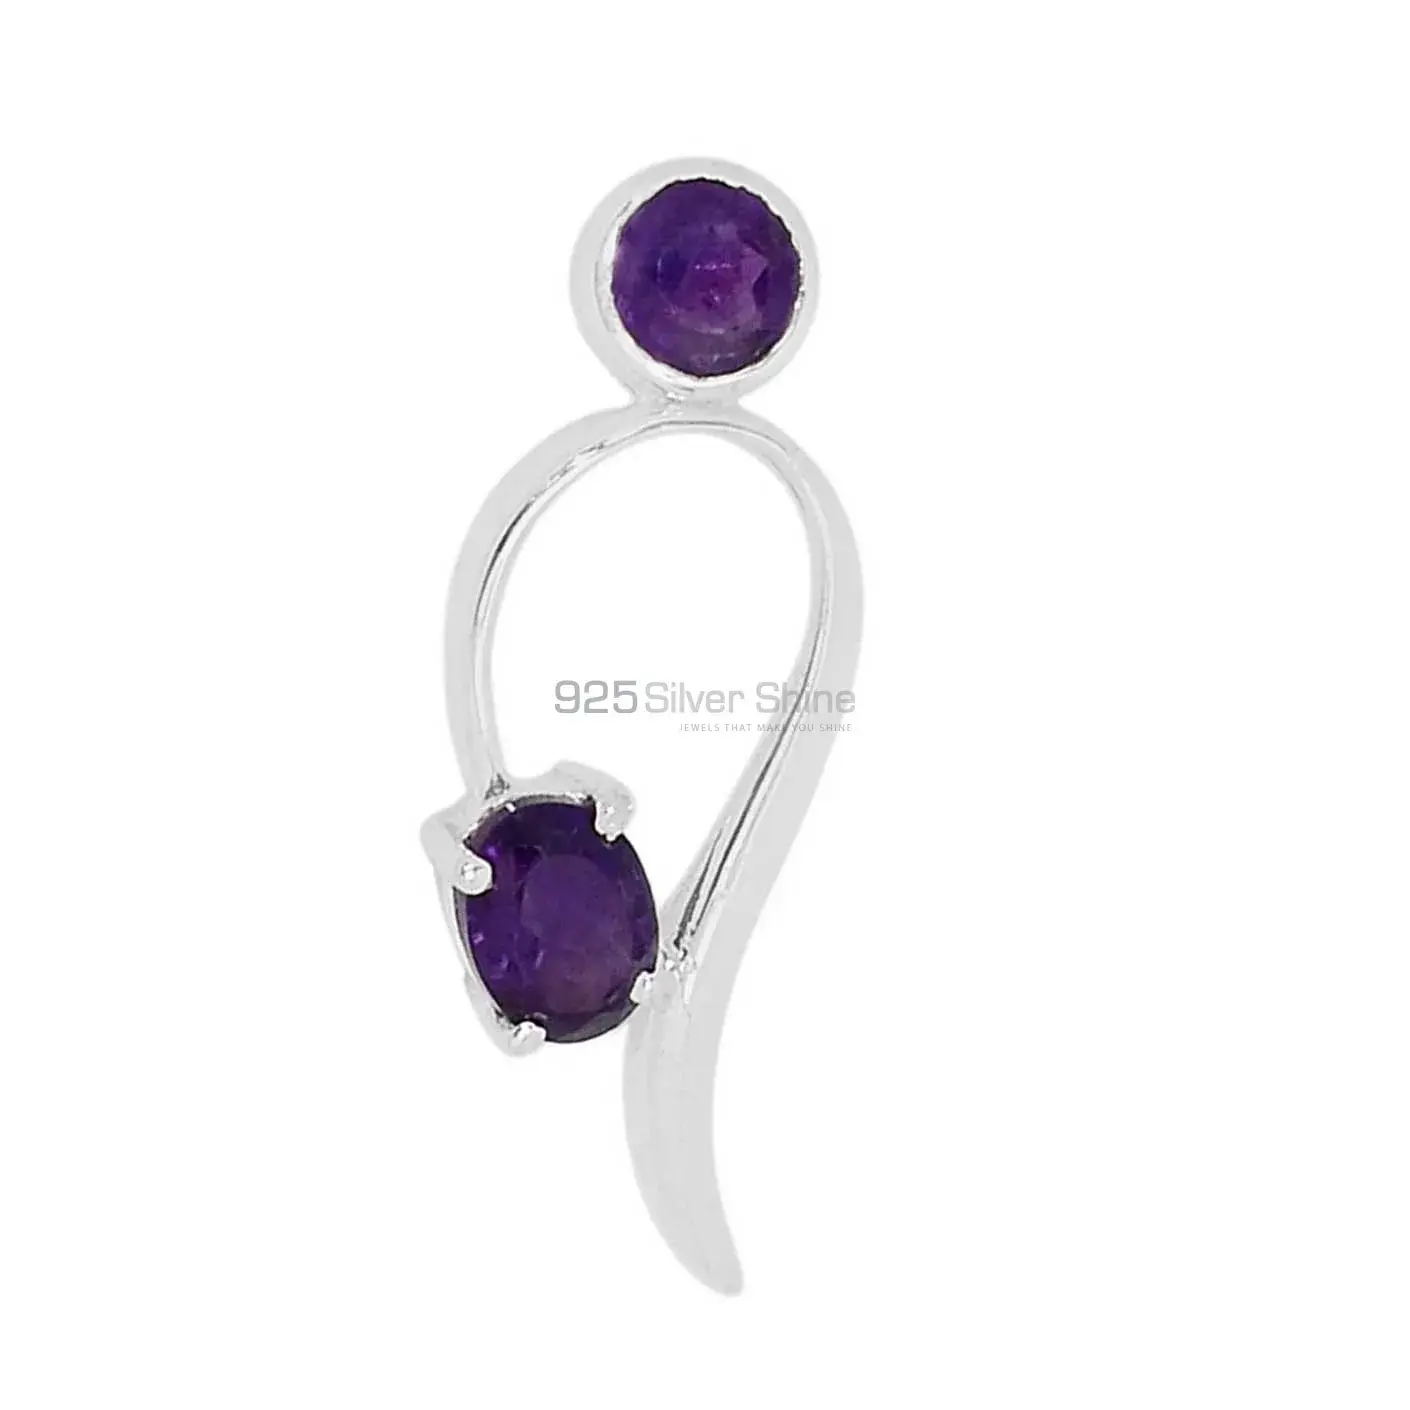 Top Quality 925 Fine Silver Pendants Suppliers In Amethyst Gemstone Jewelry 925SSP317-1_0